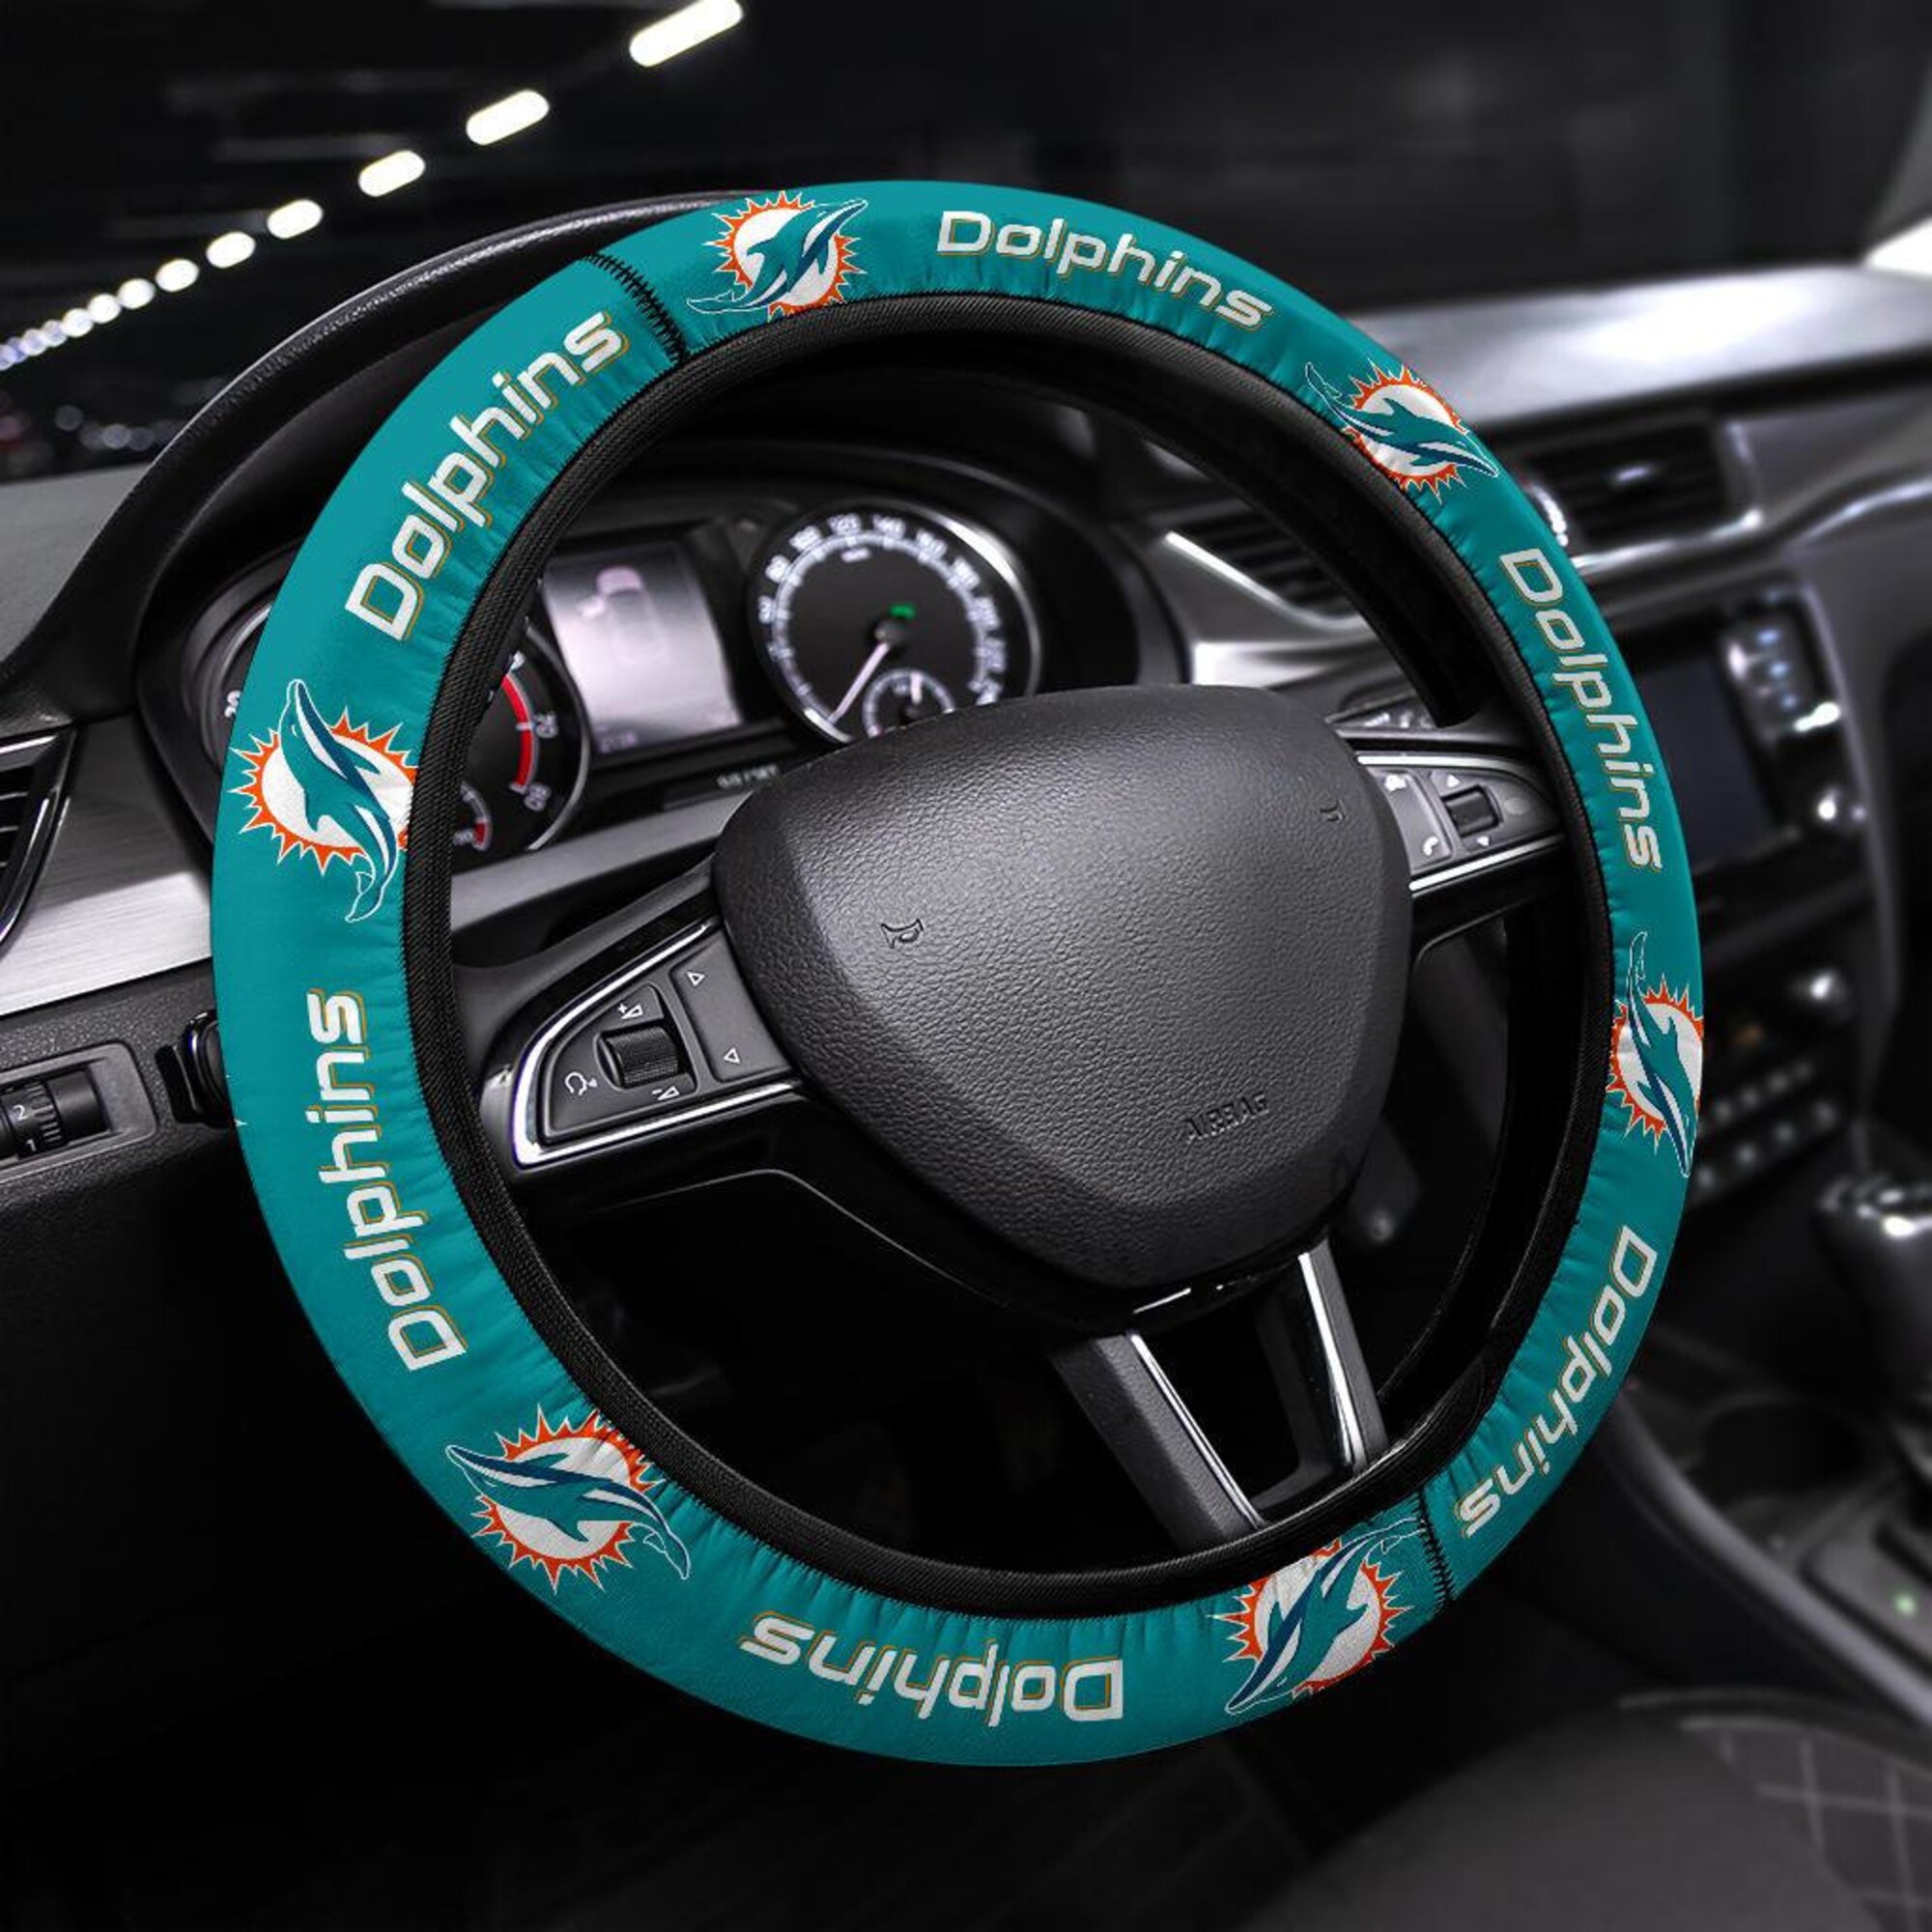 Miami Dolphins themed custom steering wheel cover